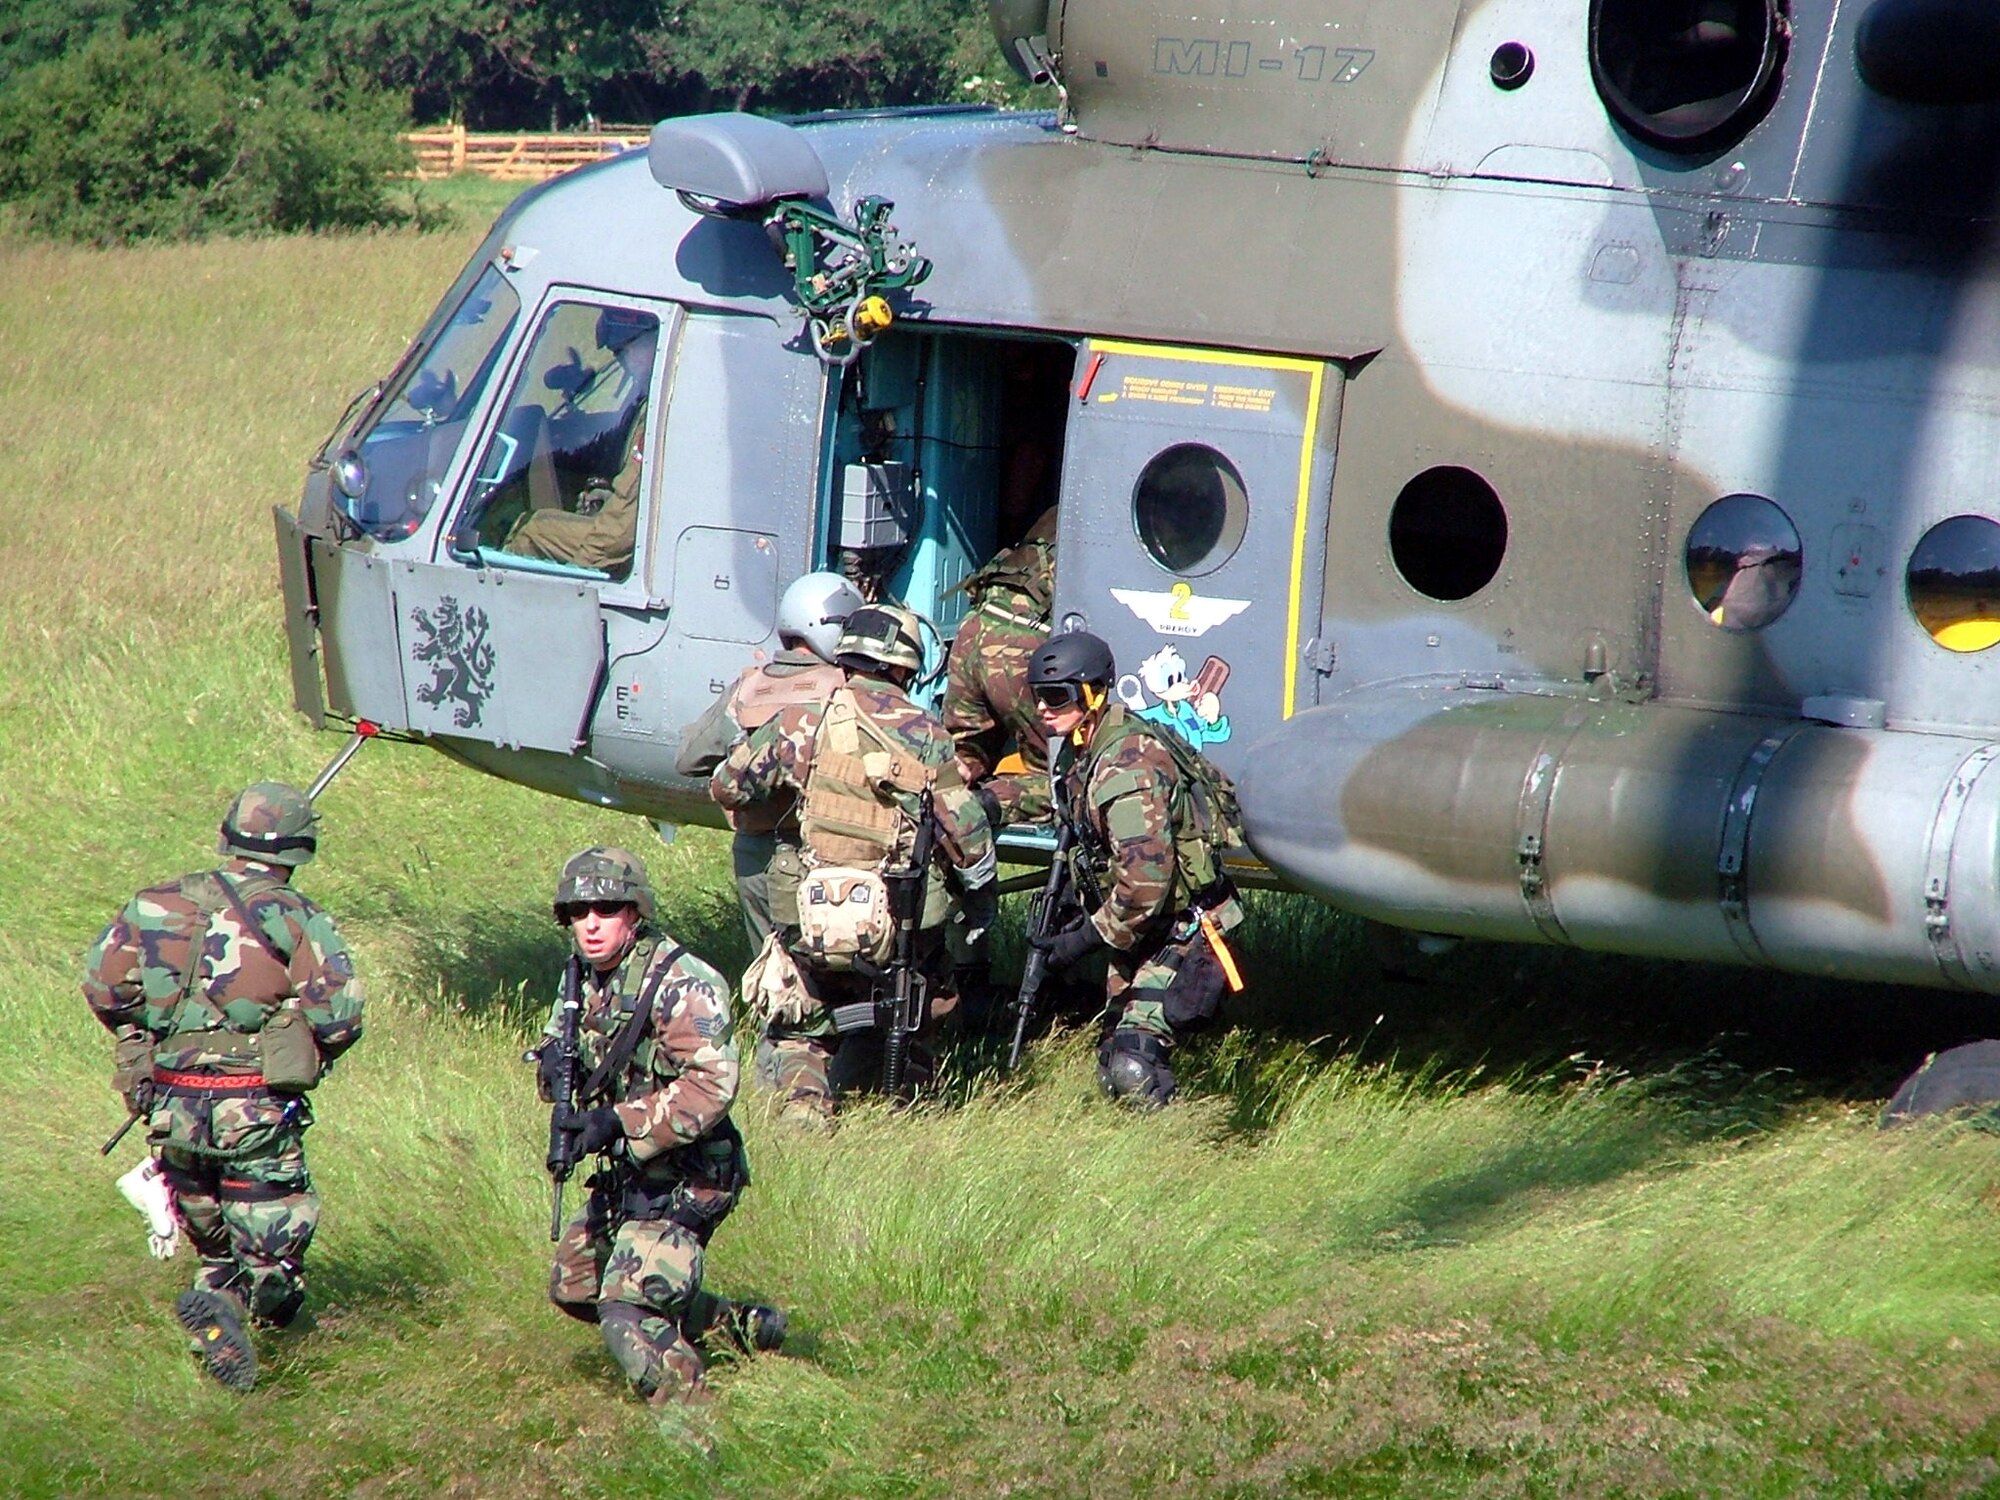 GEORG-FRIEDRICH KASERNE, Germany -- Staff Sgt. Frank Zentek (front) provides security while other members from his team, including a Czech Mi-17 Hip helicopter crew and parajumpers from the 56th Rescue Squadron and British forces, load a "downed pilot" into the helicopter.  Sergeant Zentek is assigned to the 786th Security Forces Squadron at nearby Sembach Air Base.  (U.S. Air Force photo by Jacqueline Hilinski)